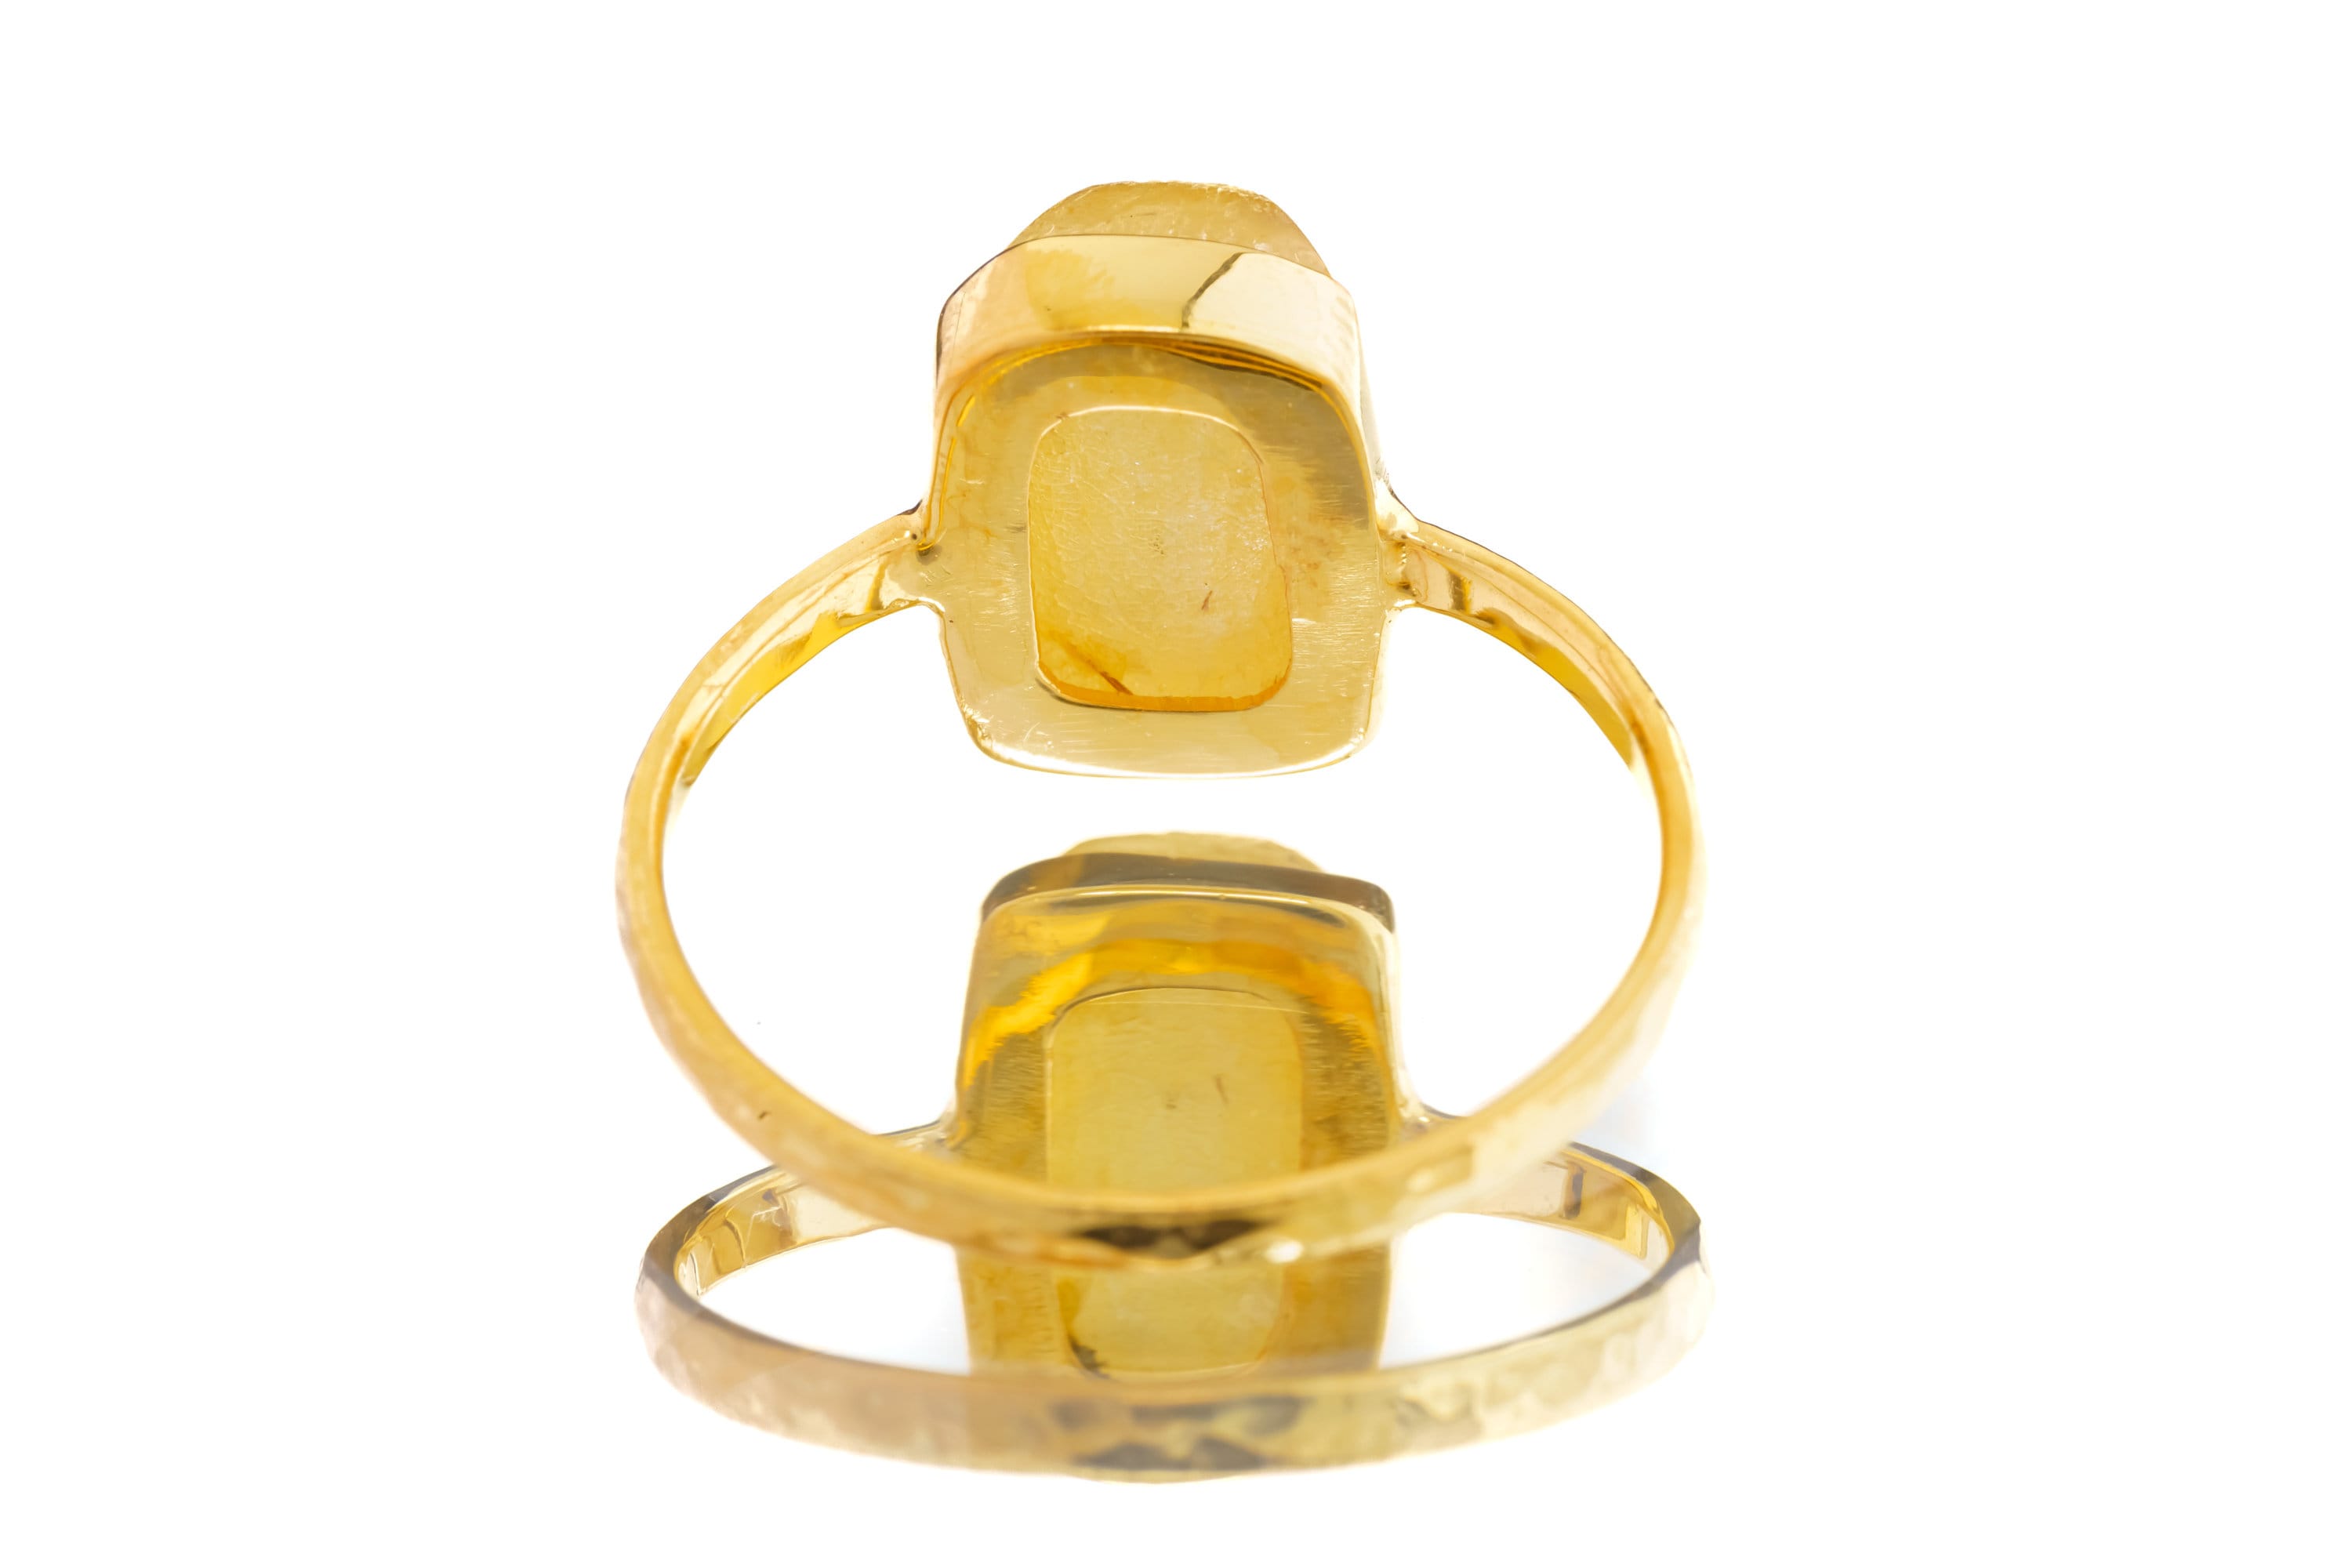 Raw Amber - Stack Crystal Ring - Size 7 US - Gold Plated 925 Sterling Silver - Thin Band Hammer Textured